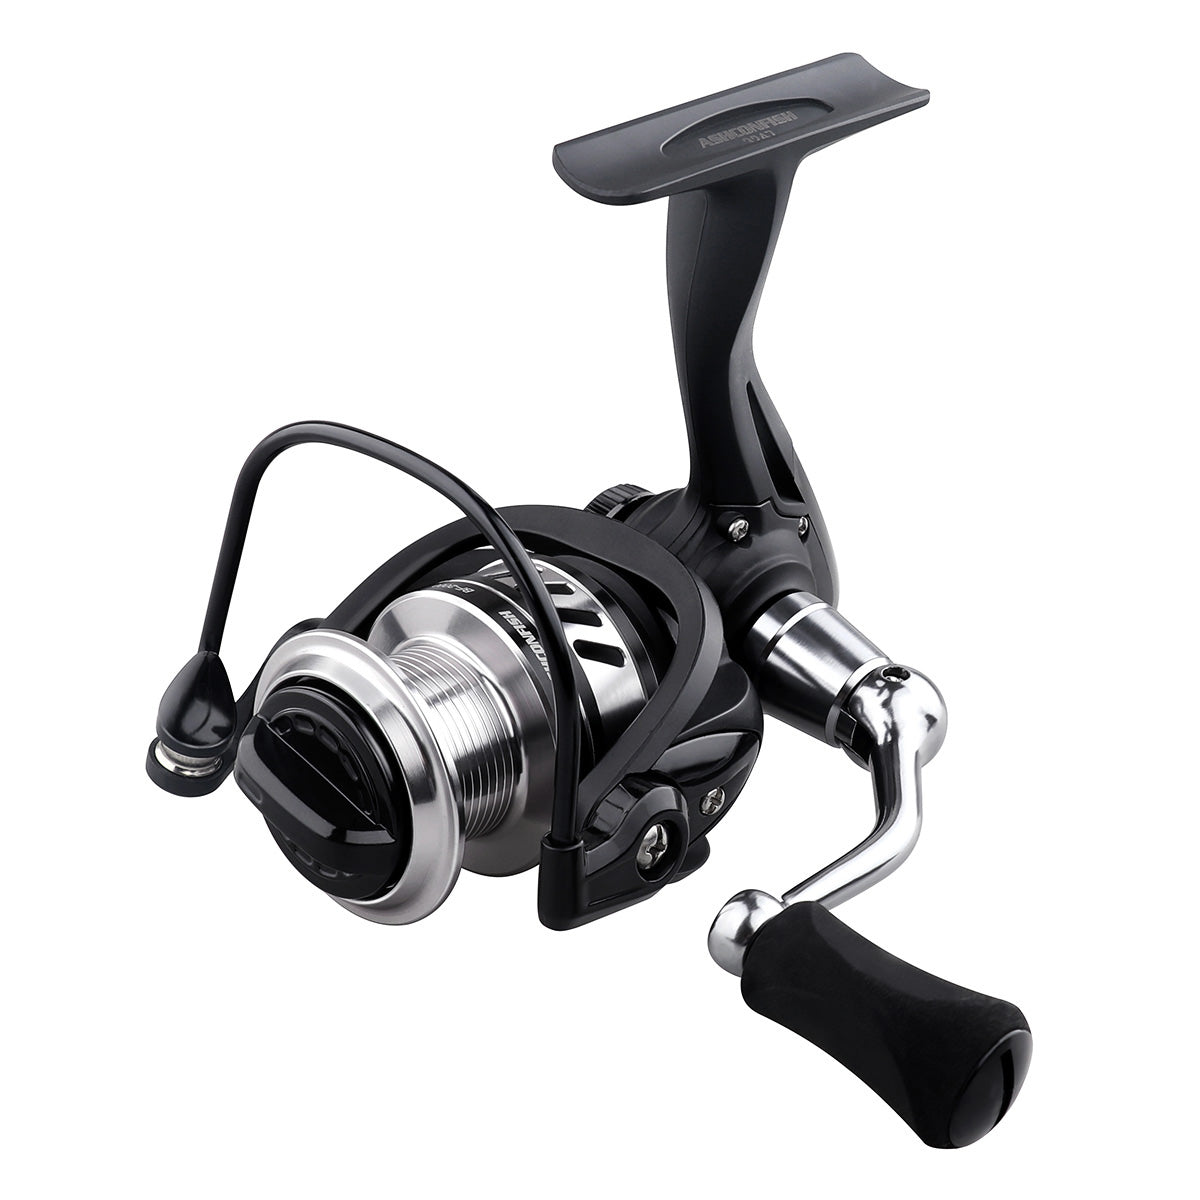 Ashconfish Spinning Reel, Saltwater Spinning Fishing Reels, Ultra  Lightweight Body, 8 Stainless Steel BB, 5.0:1 Gear Ratio, Max 17.6lbs Drag,  Come